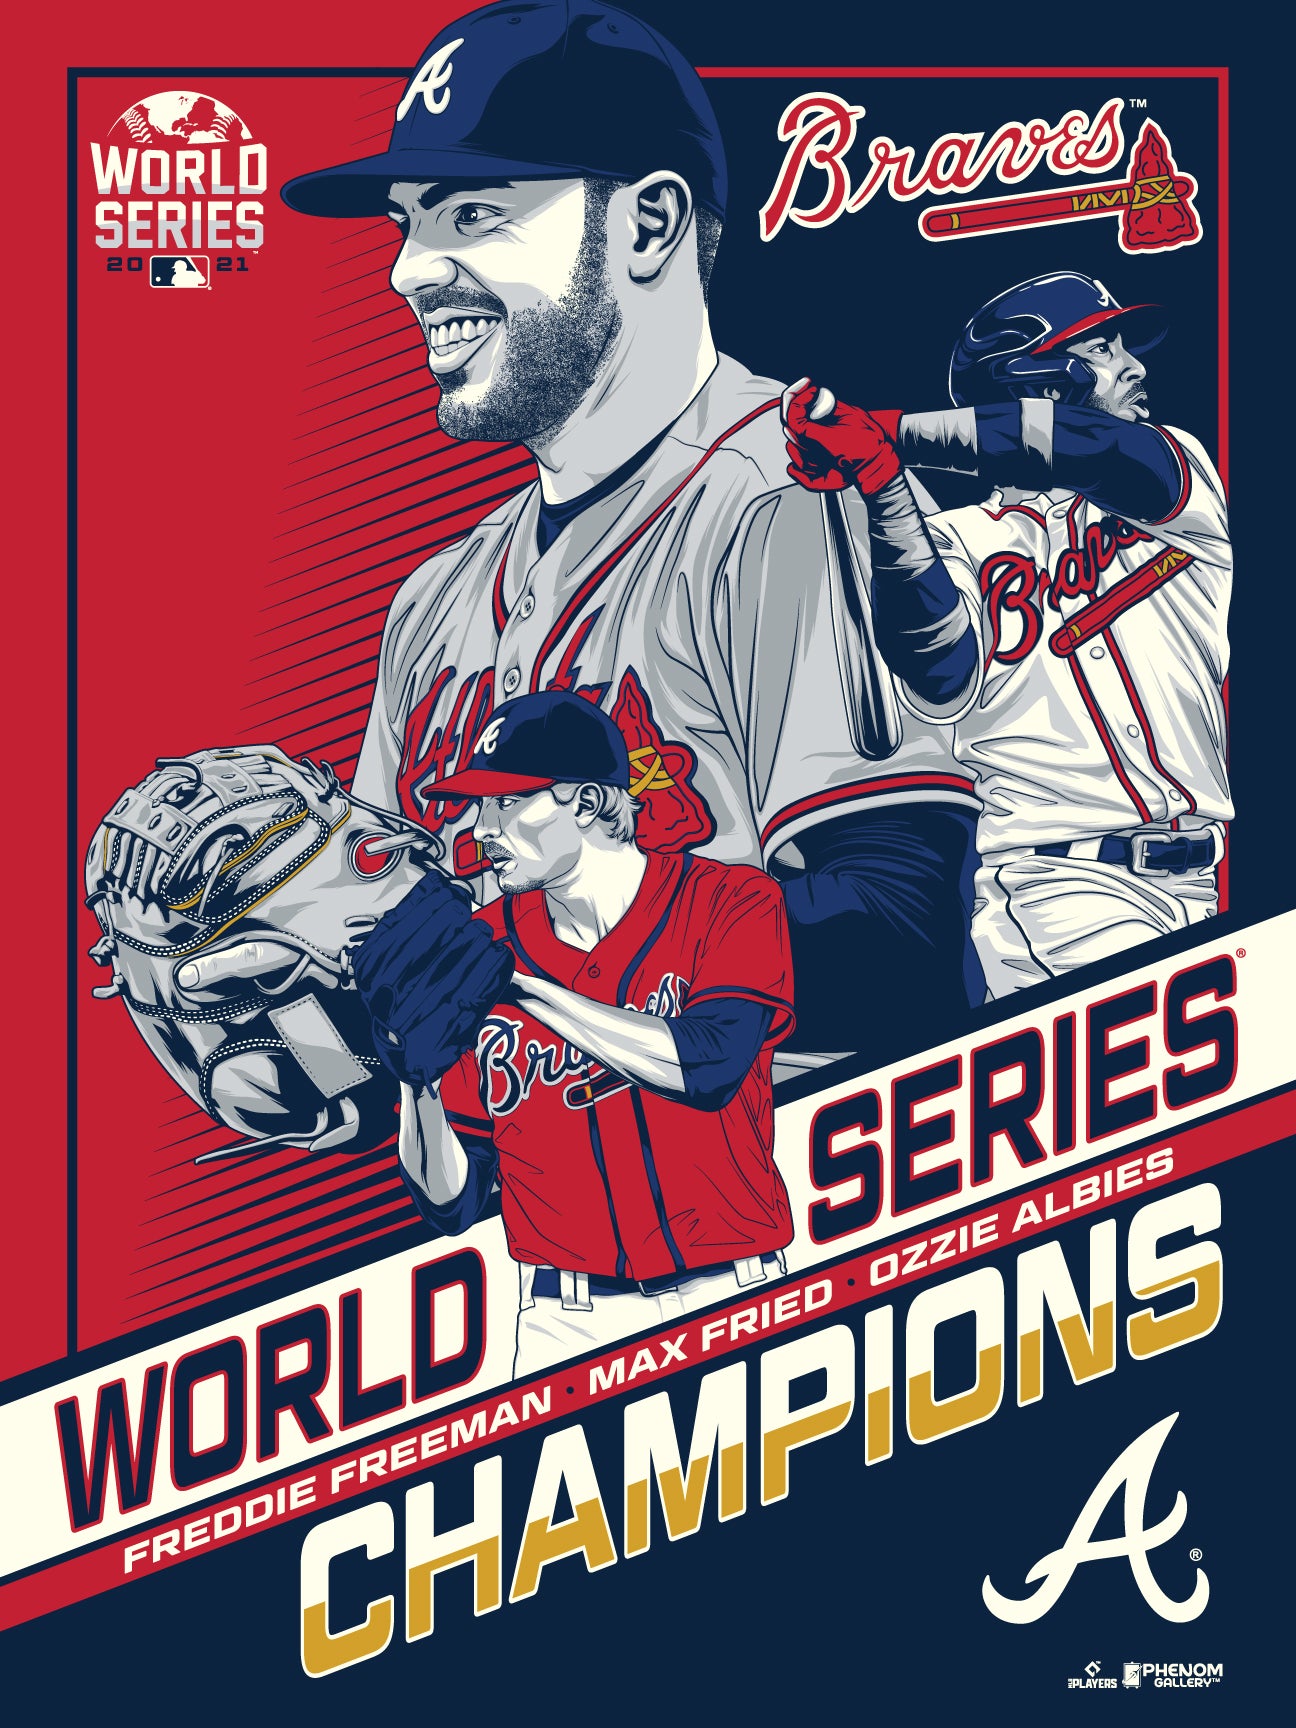 21 reasons the Braves 2021 World Series title was so very unexpected   Sporting News